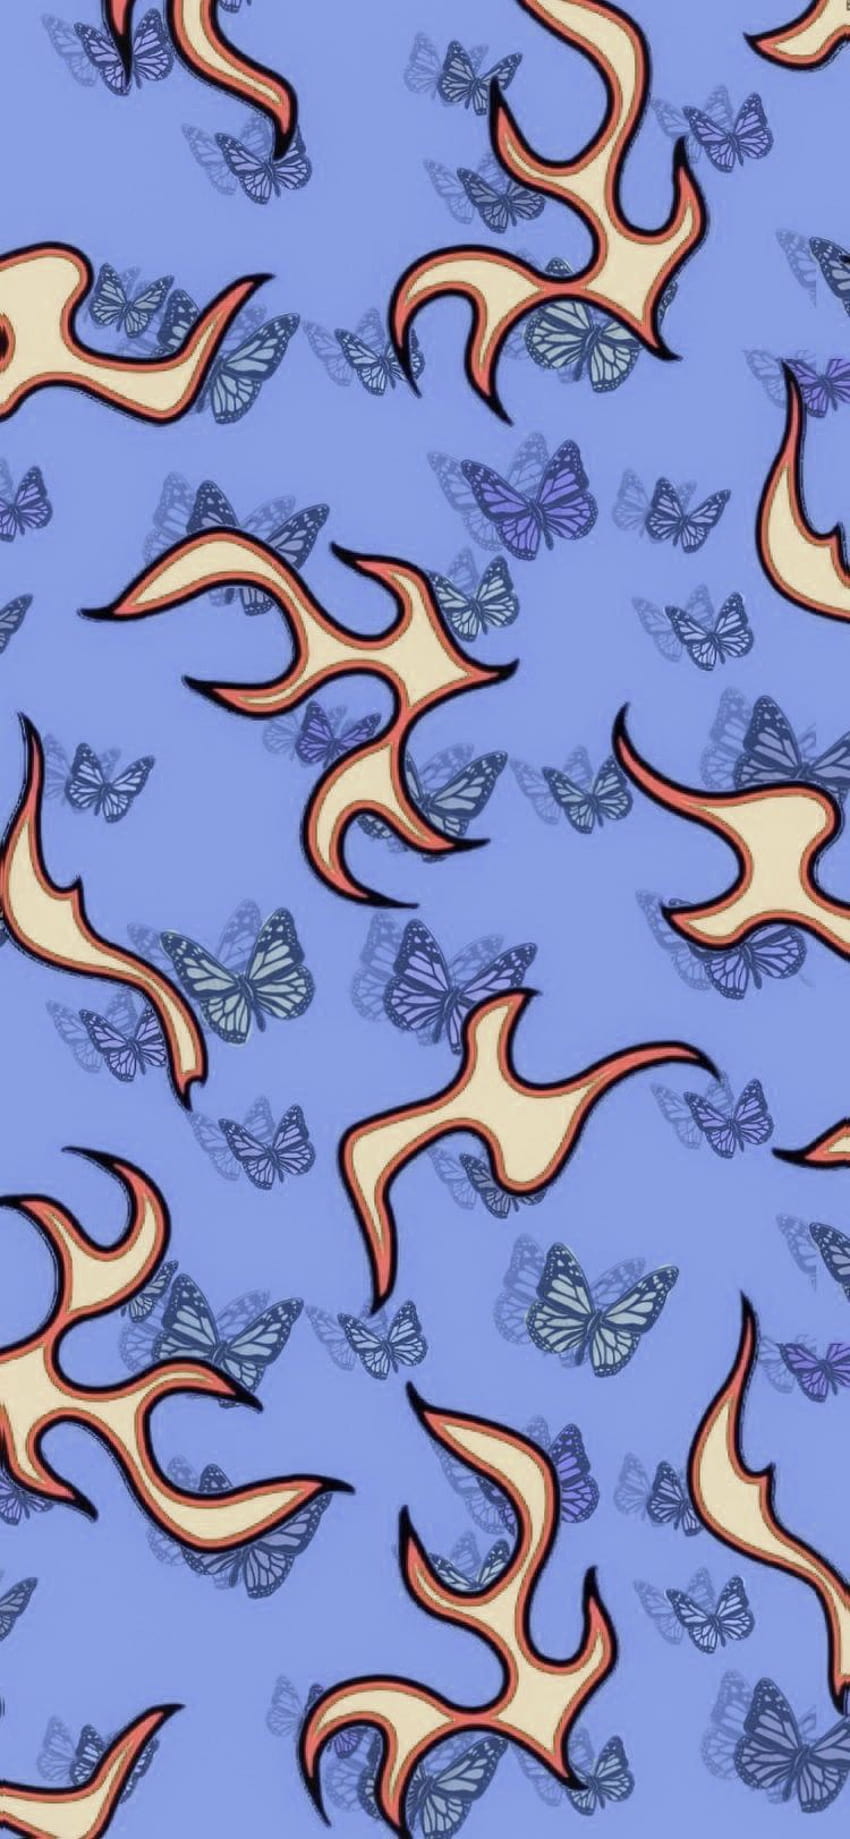 A pattern of flames on blue background - Flames, fire